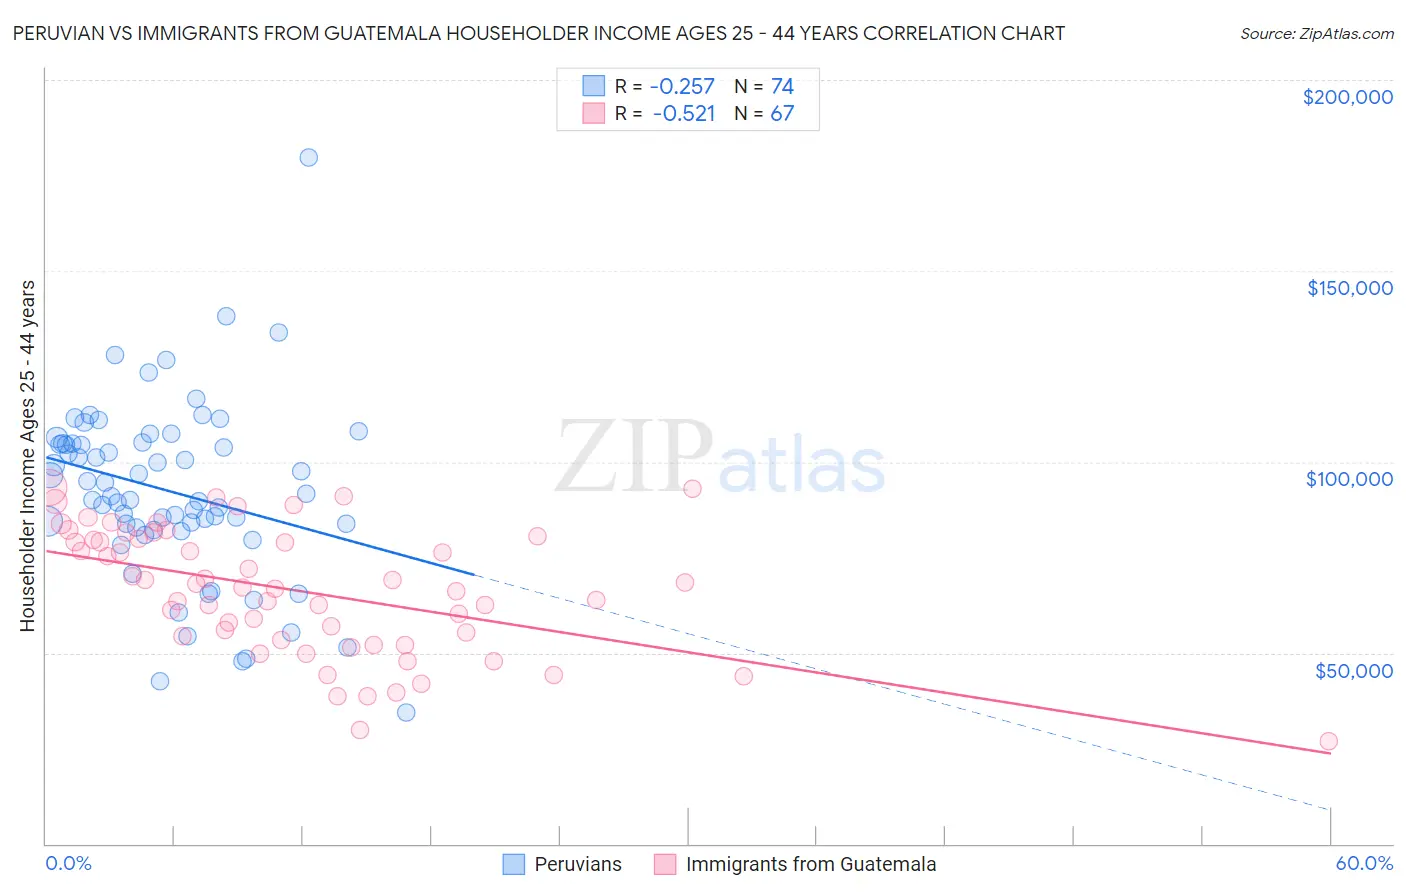 Peruvian vs Immigrants from Guatemala Householder Income Ages 25 - 44 years